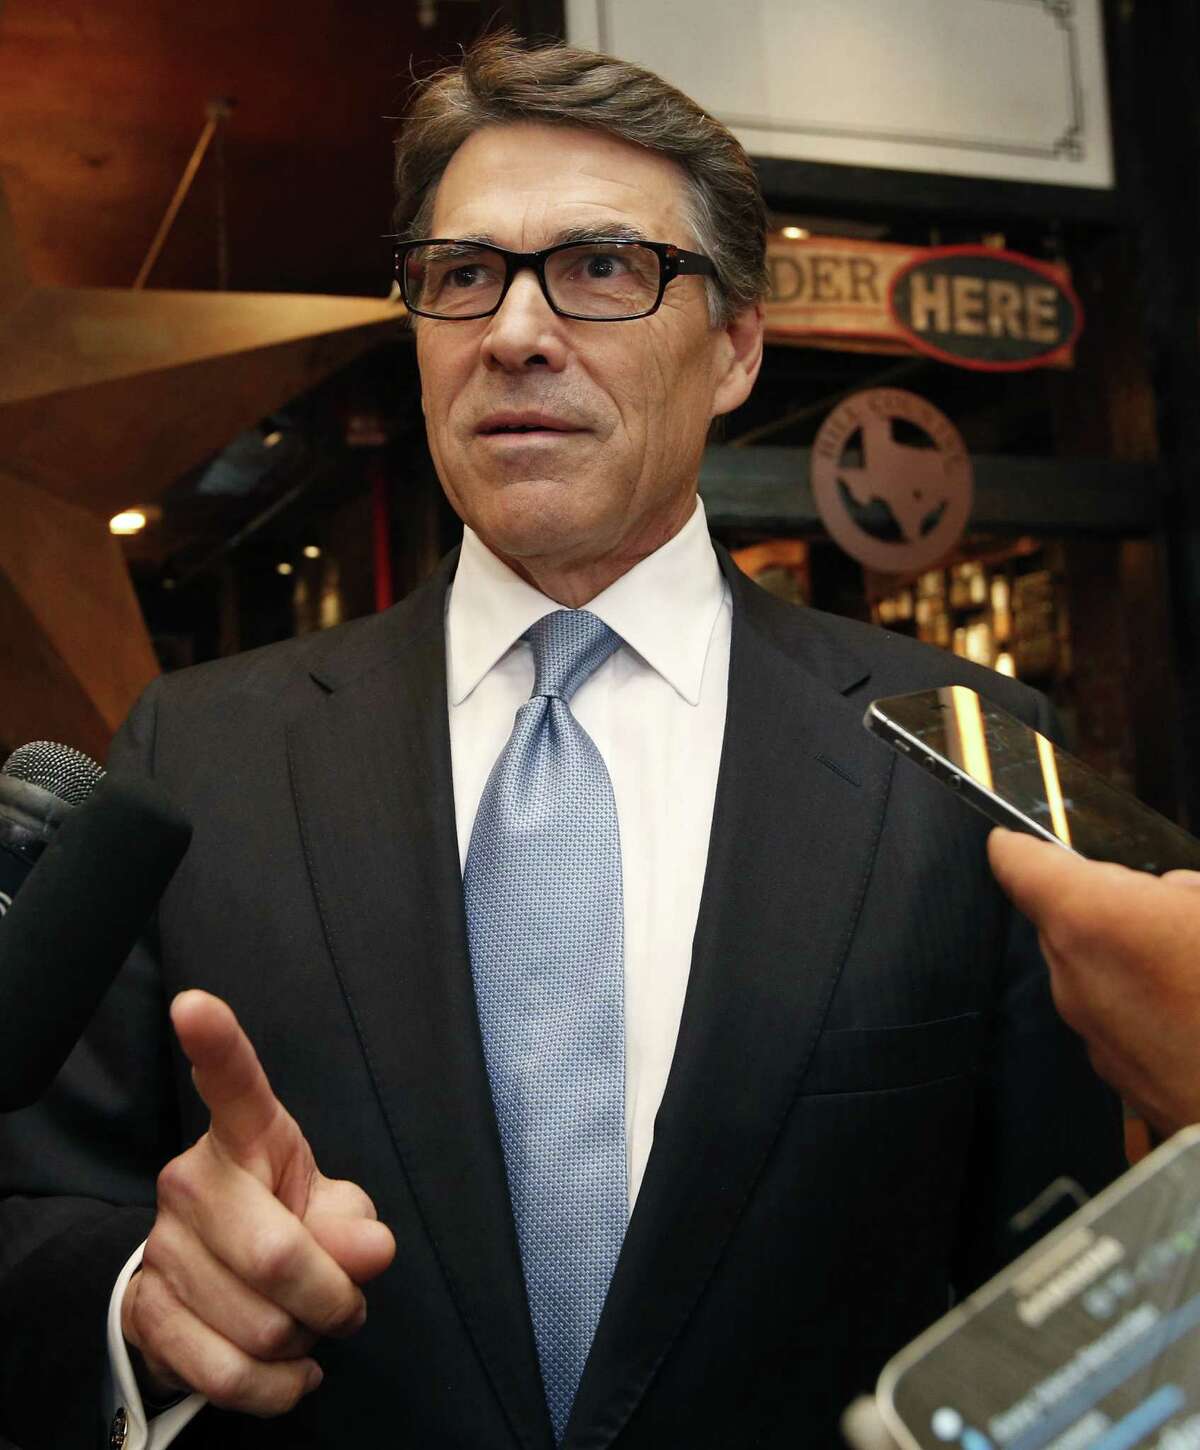 Gov. Rick Perry declined to say what companies he met with in New York.